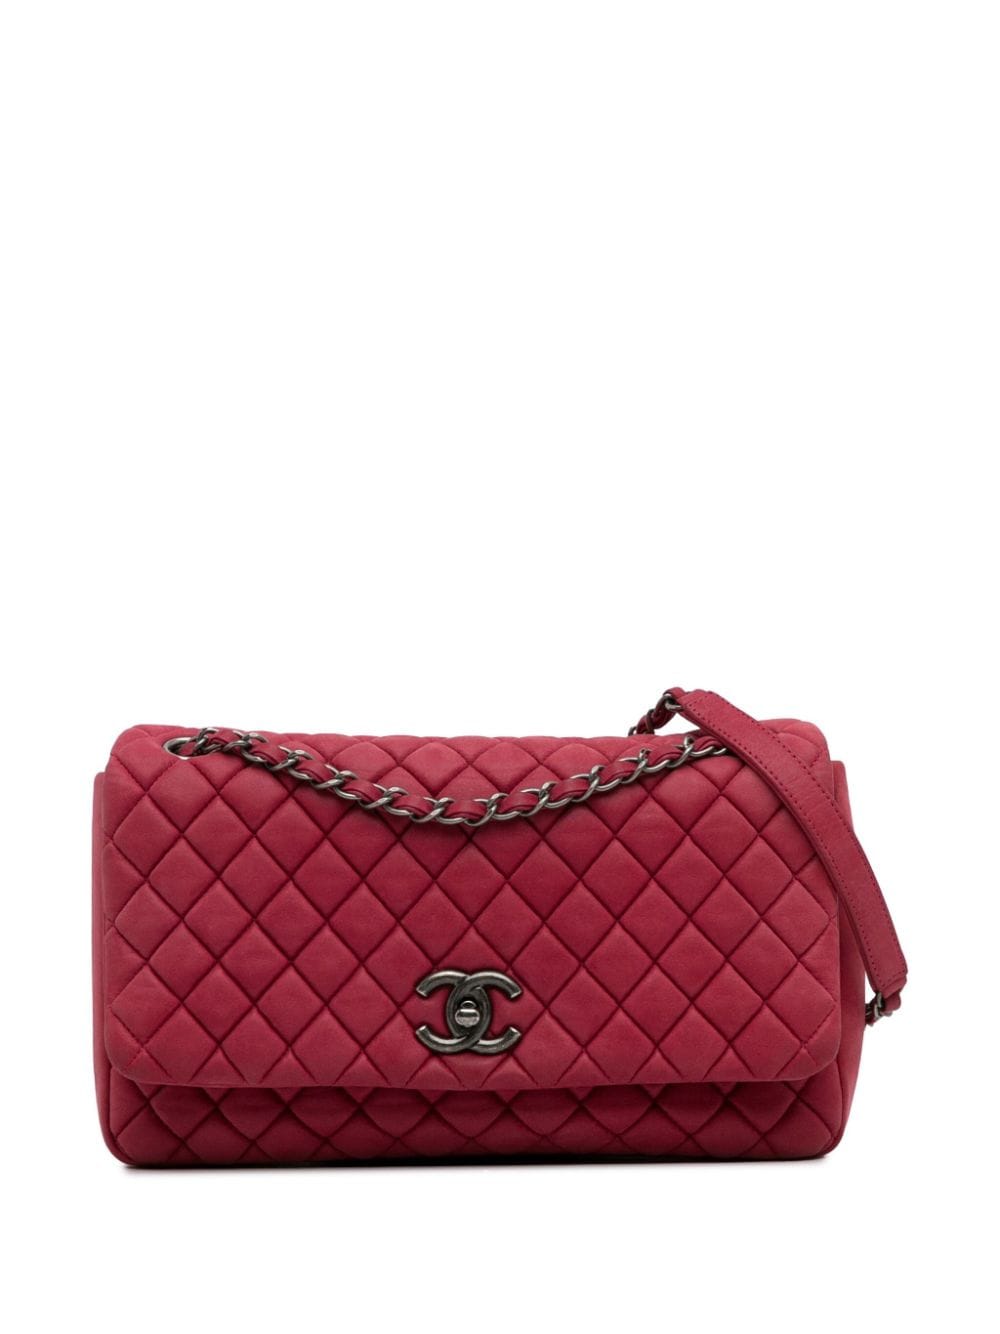 Pre-owned Chanel 2012-2013 Medium New Bubble Flap Shoulder Bag In Red